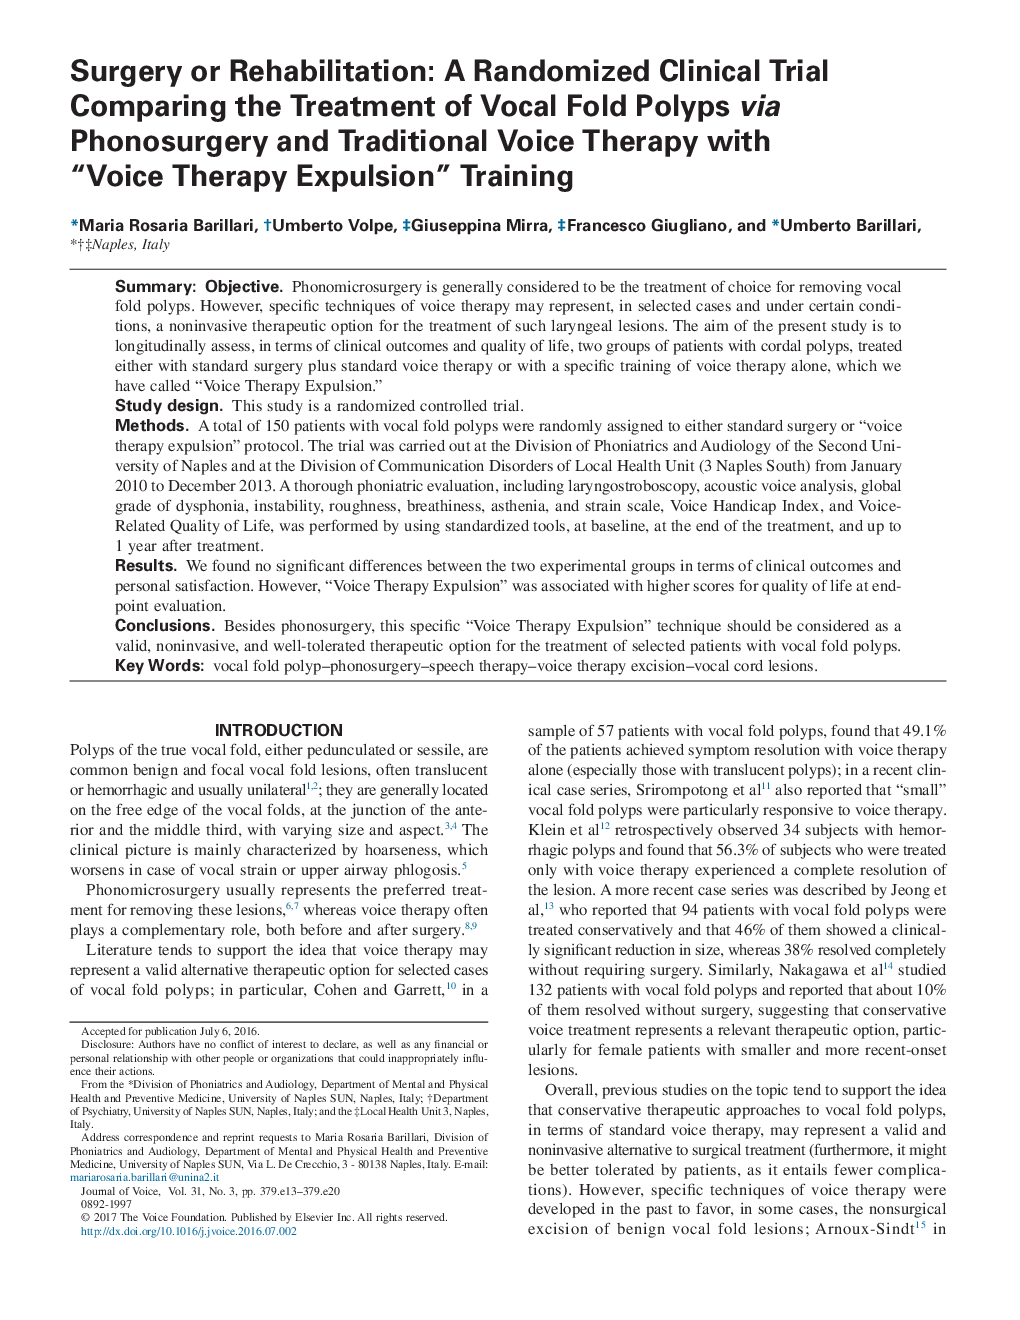 Surgery or Rehabilitation: A Randomized Clinical Trial Comparing the Treatment of Vocal Fold Polyps via Phonosurgery and Traditional Voice Therapy with “Voice Therapy Expulsion” Training